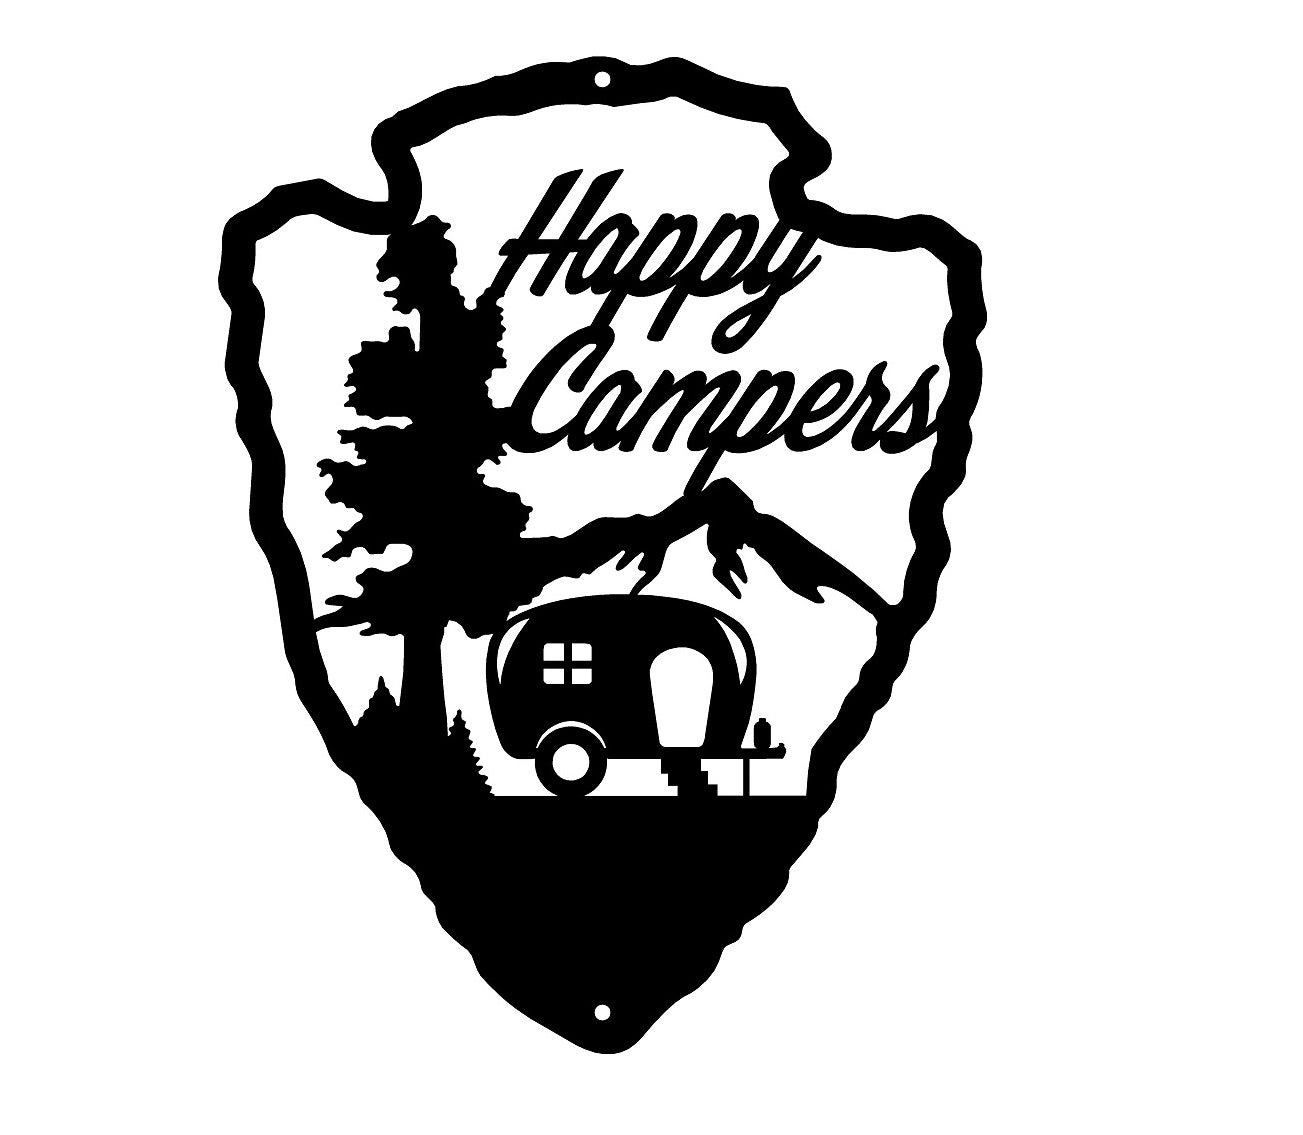 Happy Campers Wall Art - The Metal Peddler Decorative Plaques camp, dad, Inv-T, nature, not-dog, outdoor life, wall art